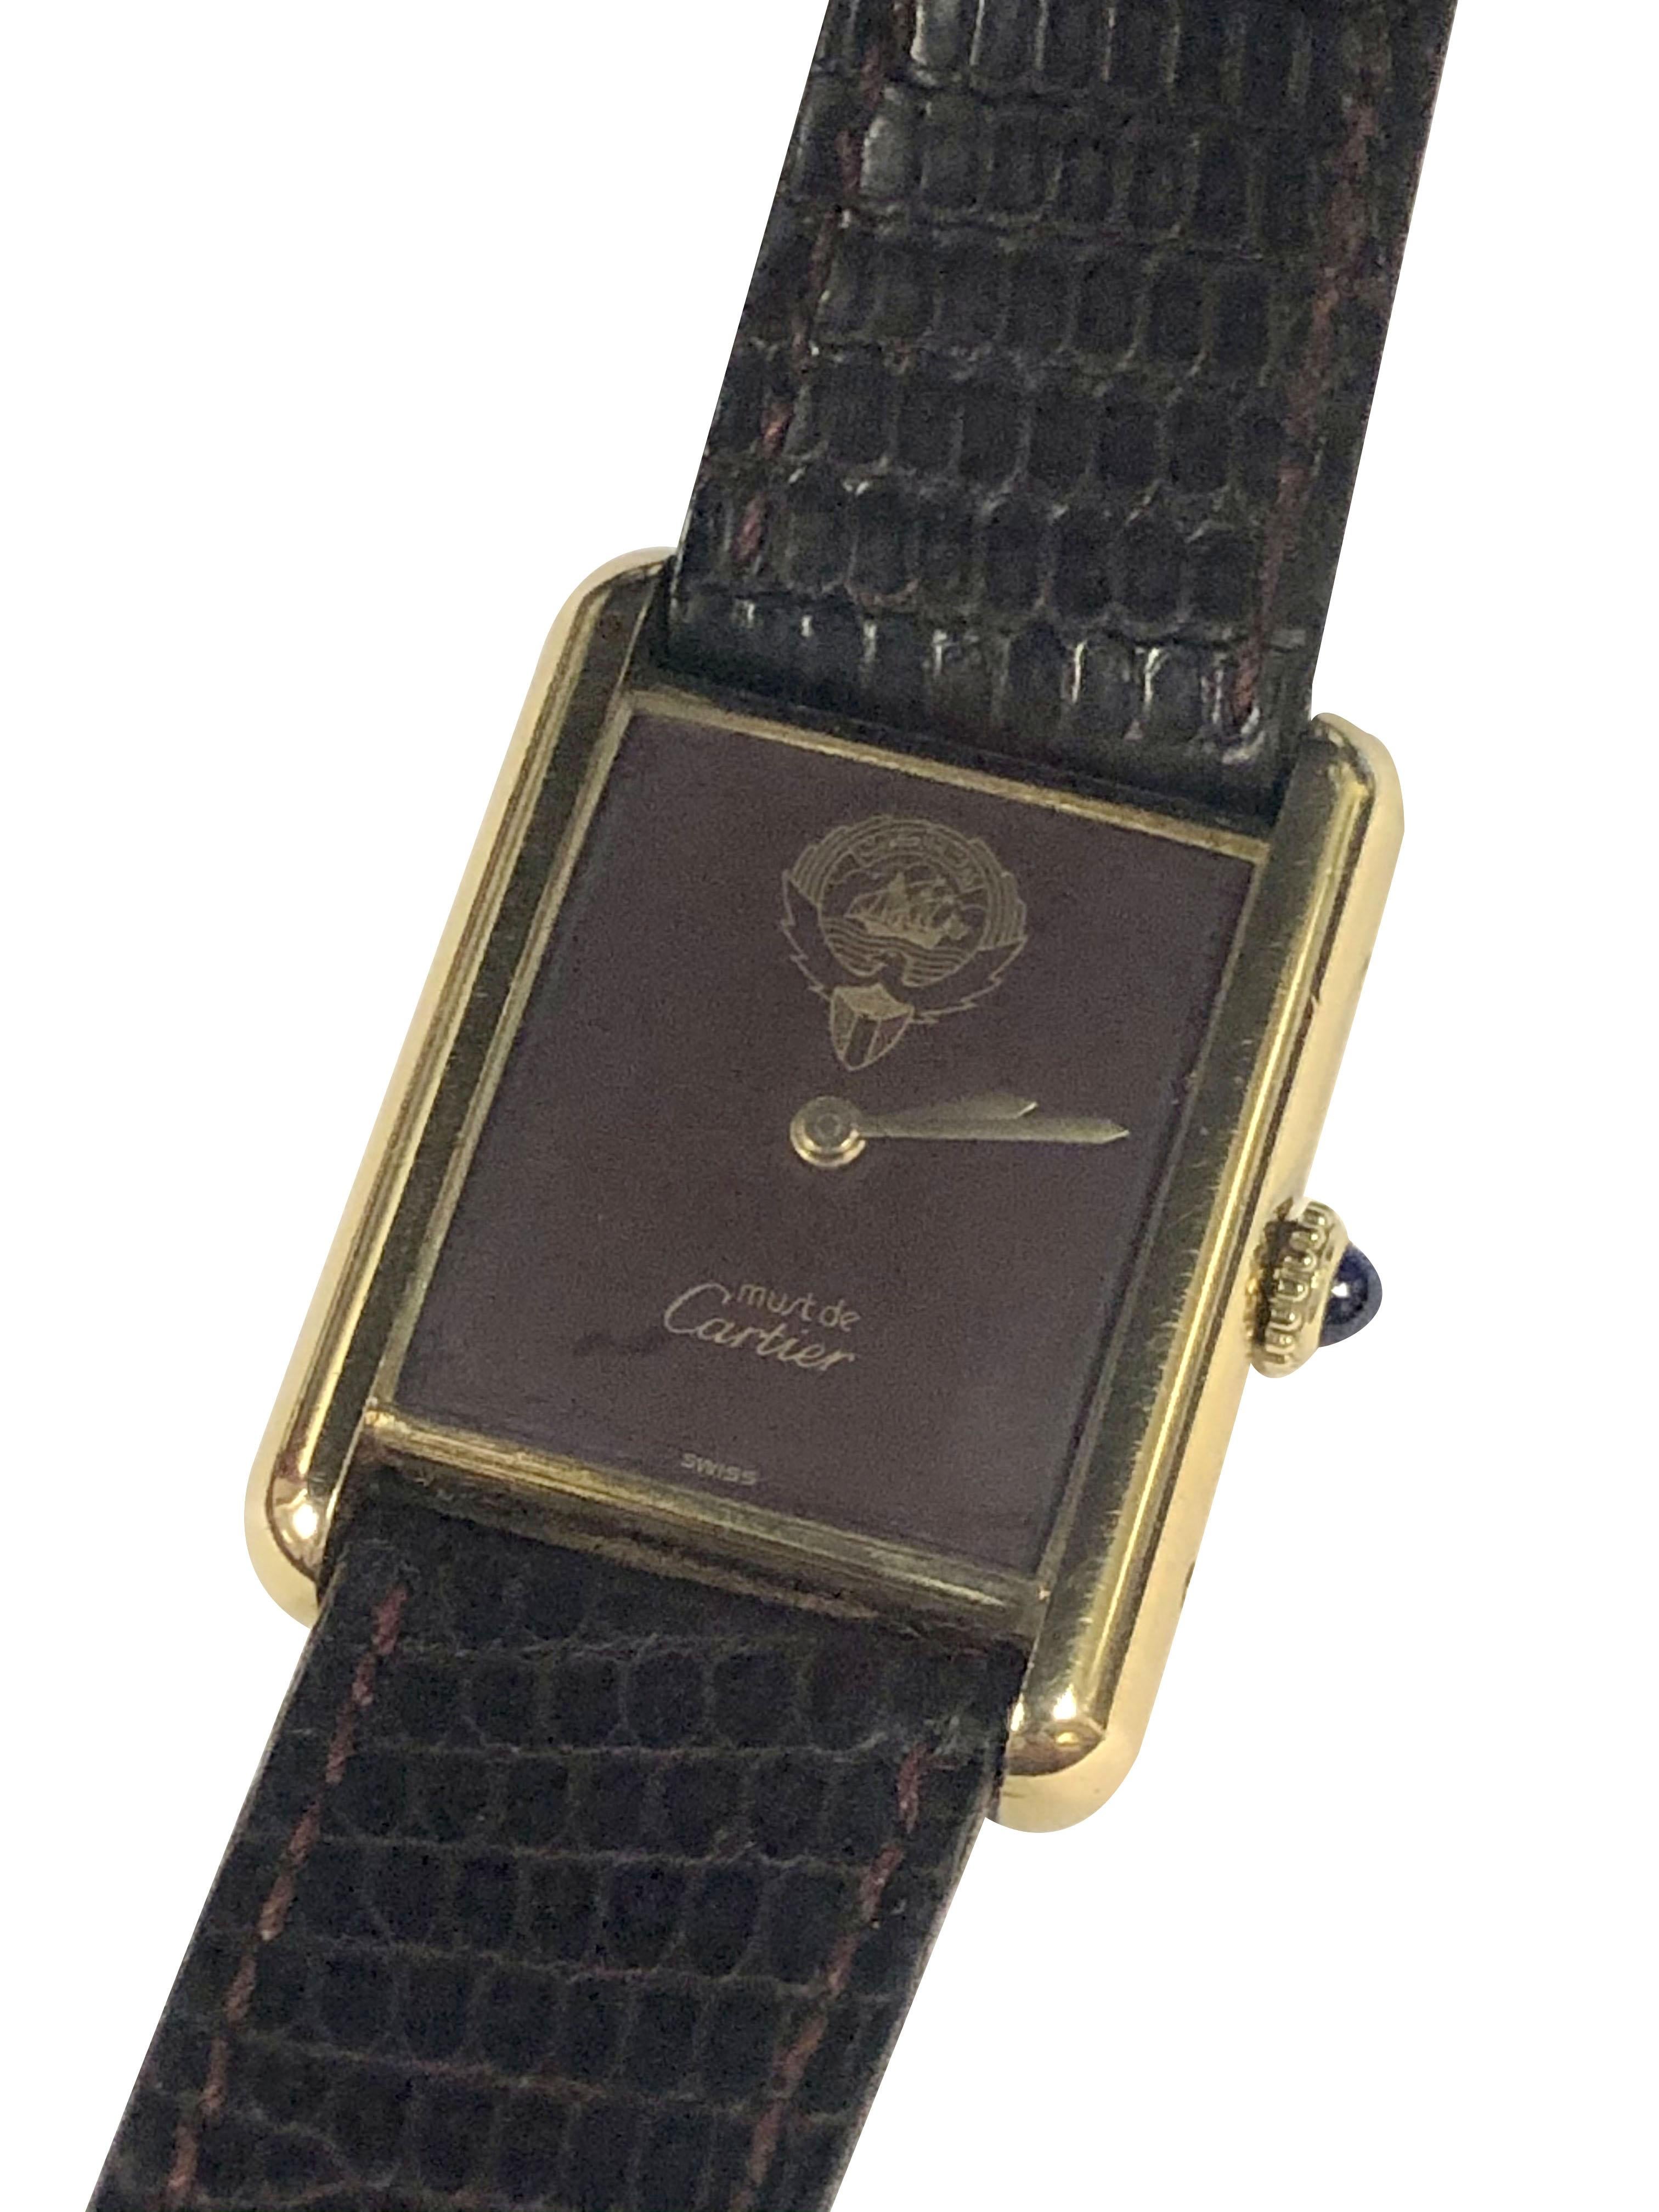 Circa 1980s Cartier Special Presentation Wrist Watch and Pen set for Kuwait. 30 X 24 M.M. 2 Piece Vermeil ( Gold Plate on 925 Sterling Silver ) case, 17 Jewel Mechanical, Manual wind Movement, Sapphire Crown, Burgundy Dial with Gold Kuwait Coat of